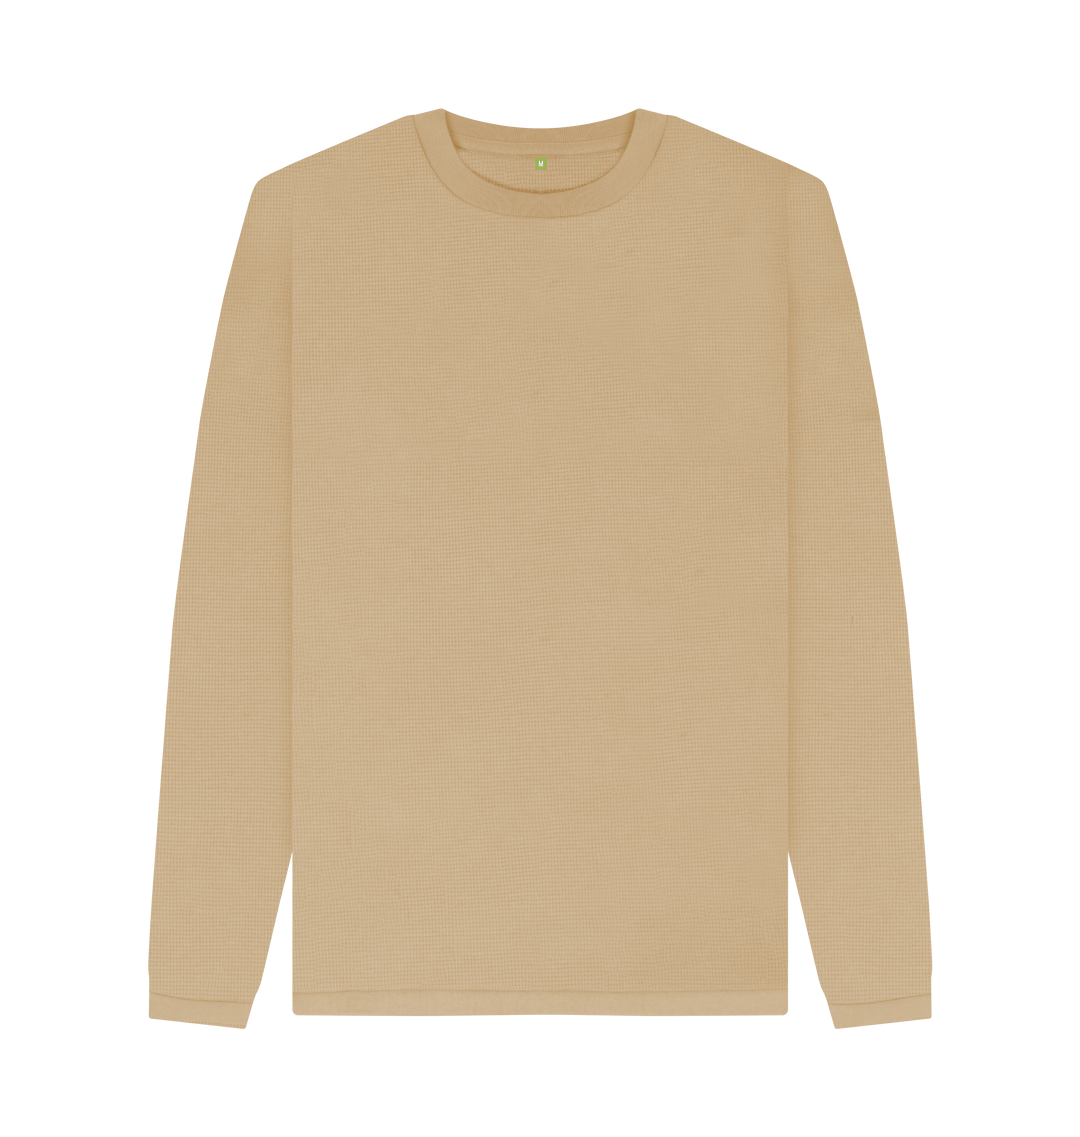 Kenco Outfitters  Filson Men's Waffle Knit Thermal Crew